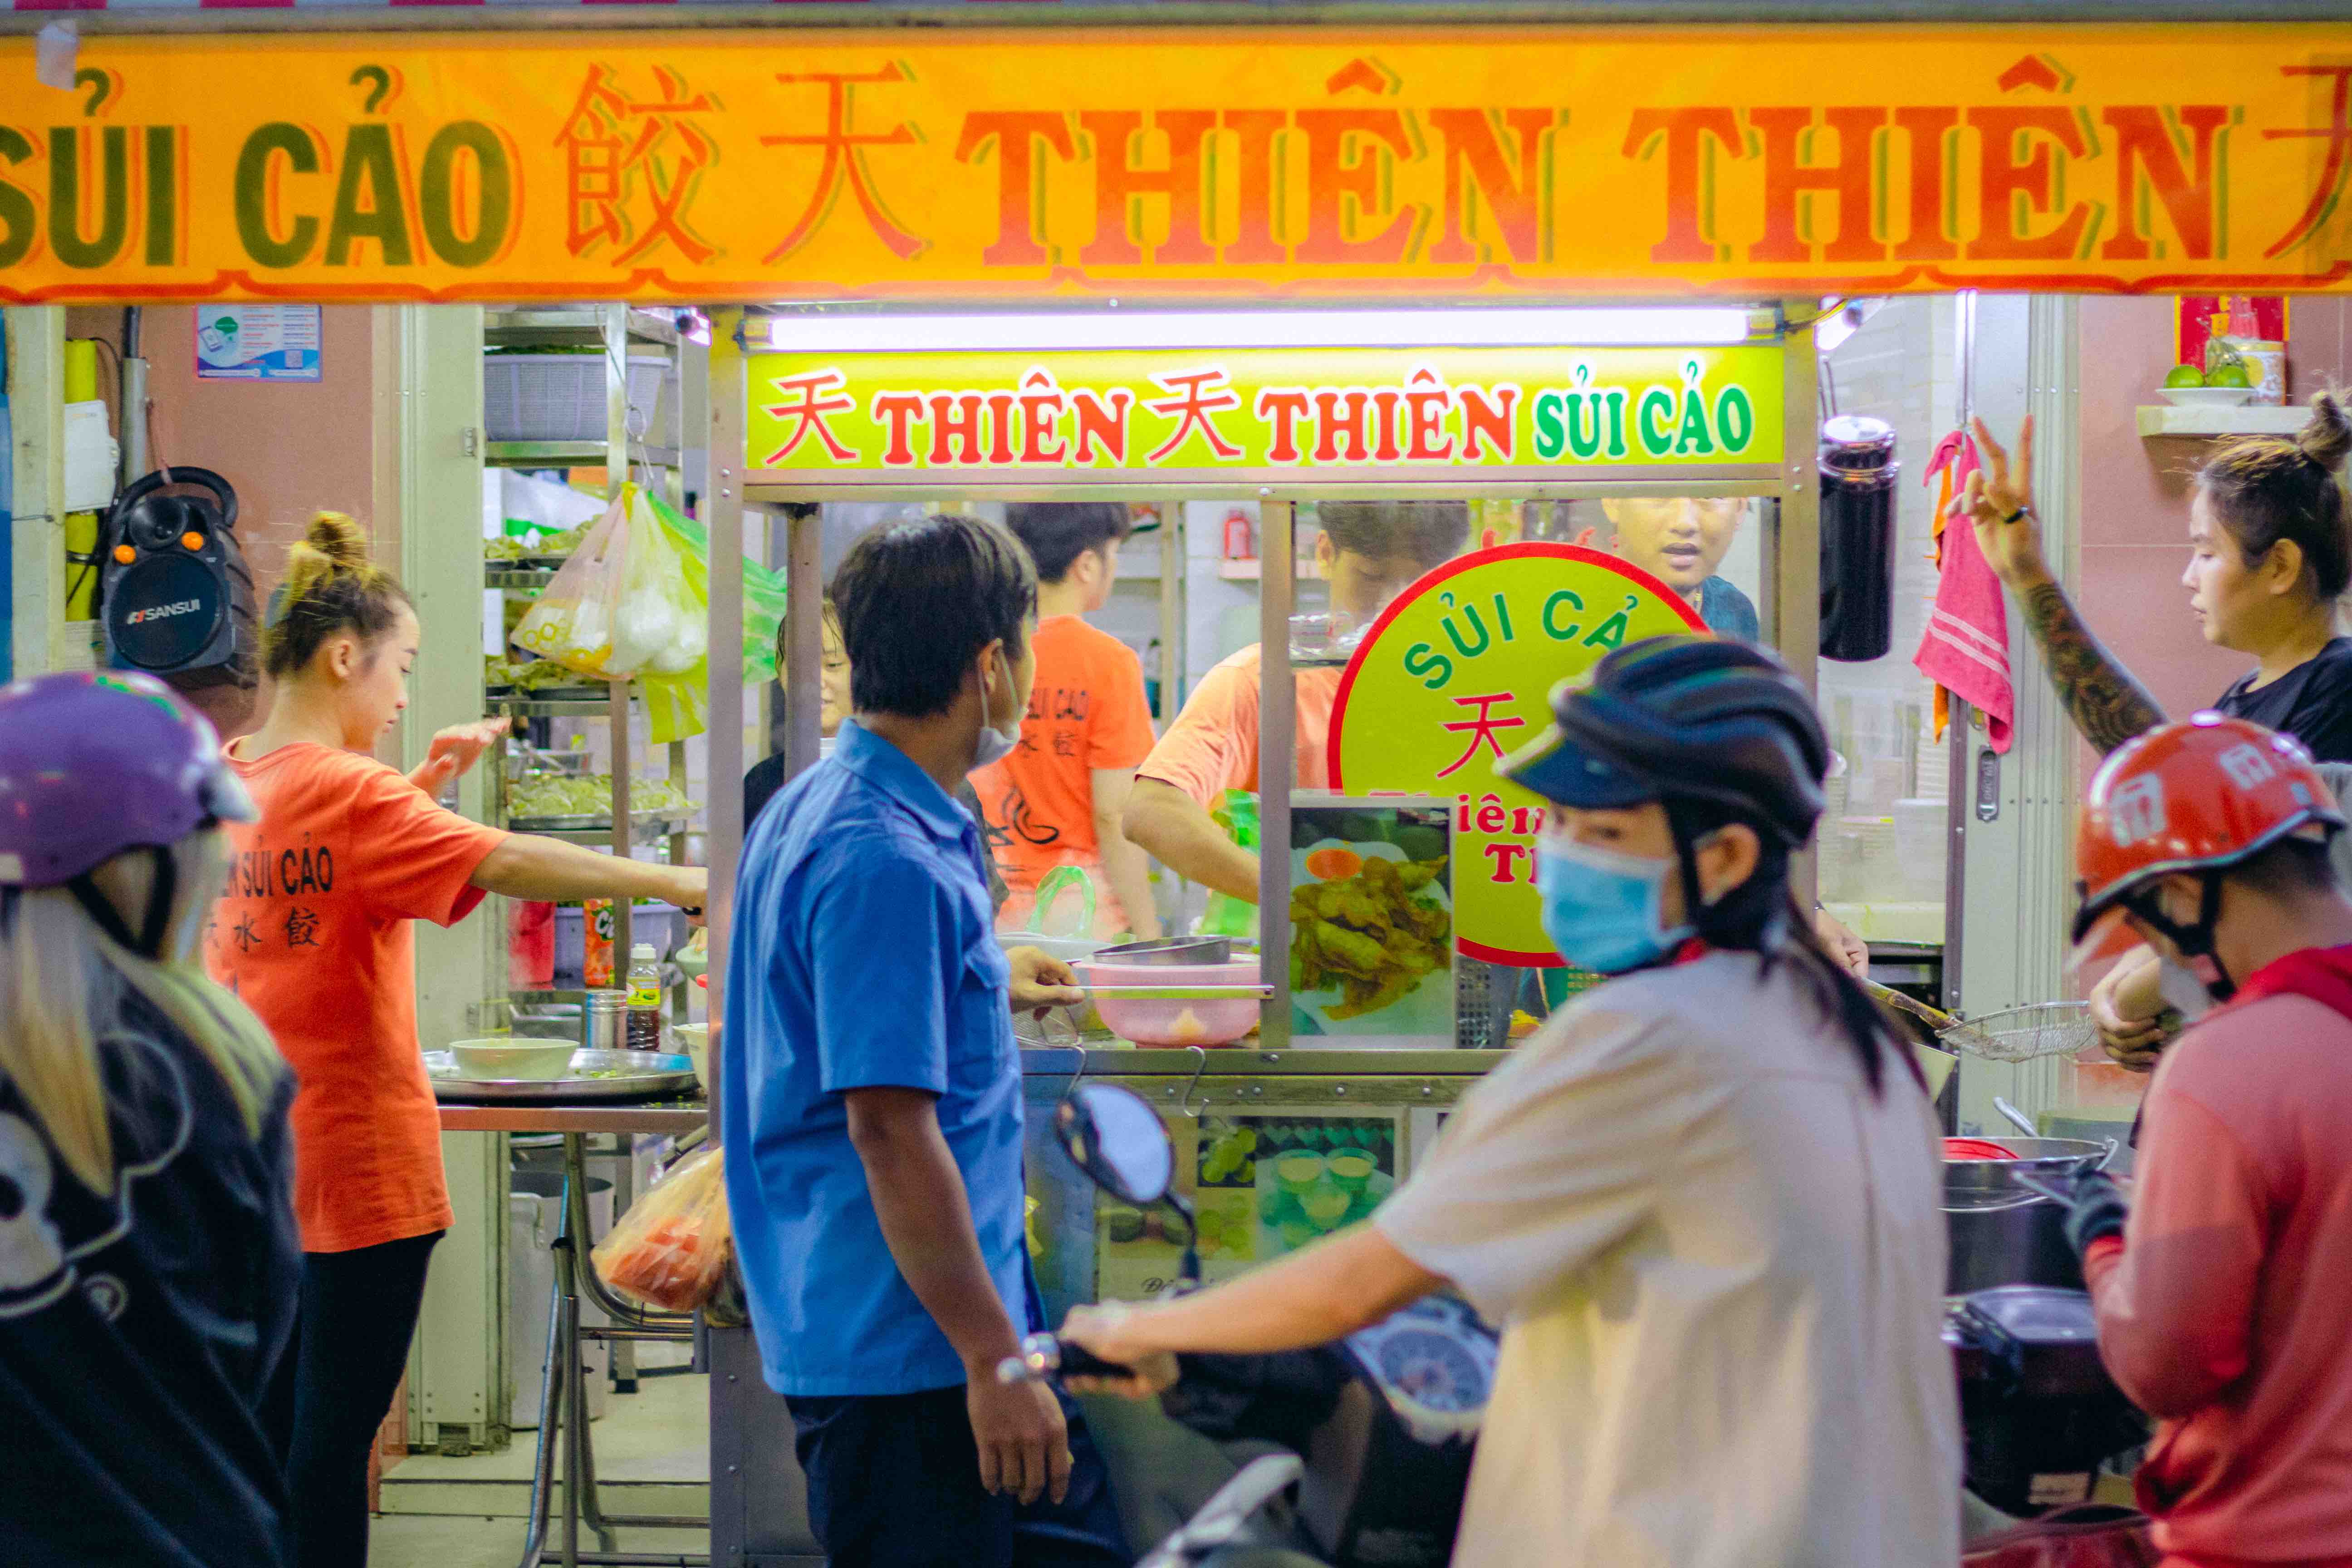 Customers await take-away orders of shuijiao at a stall on Ha Ton Quyen Street, District 11, Ho Chi Minh City. Photo: Linh To / Tuoi Tre News